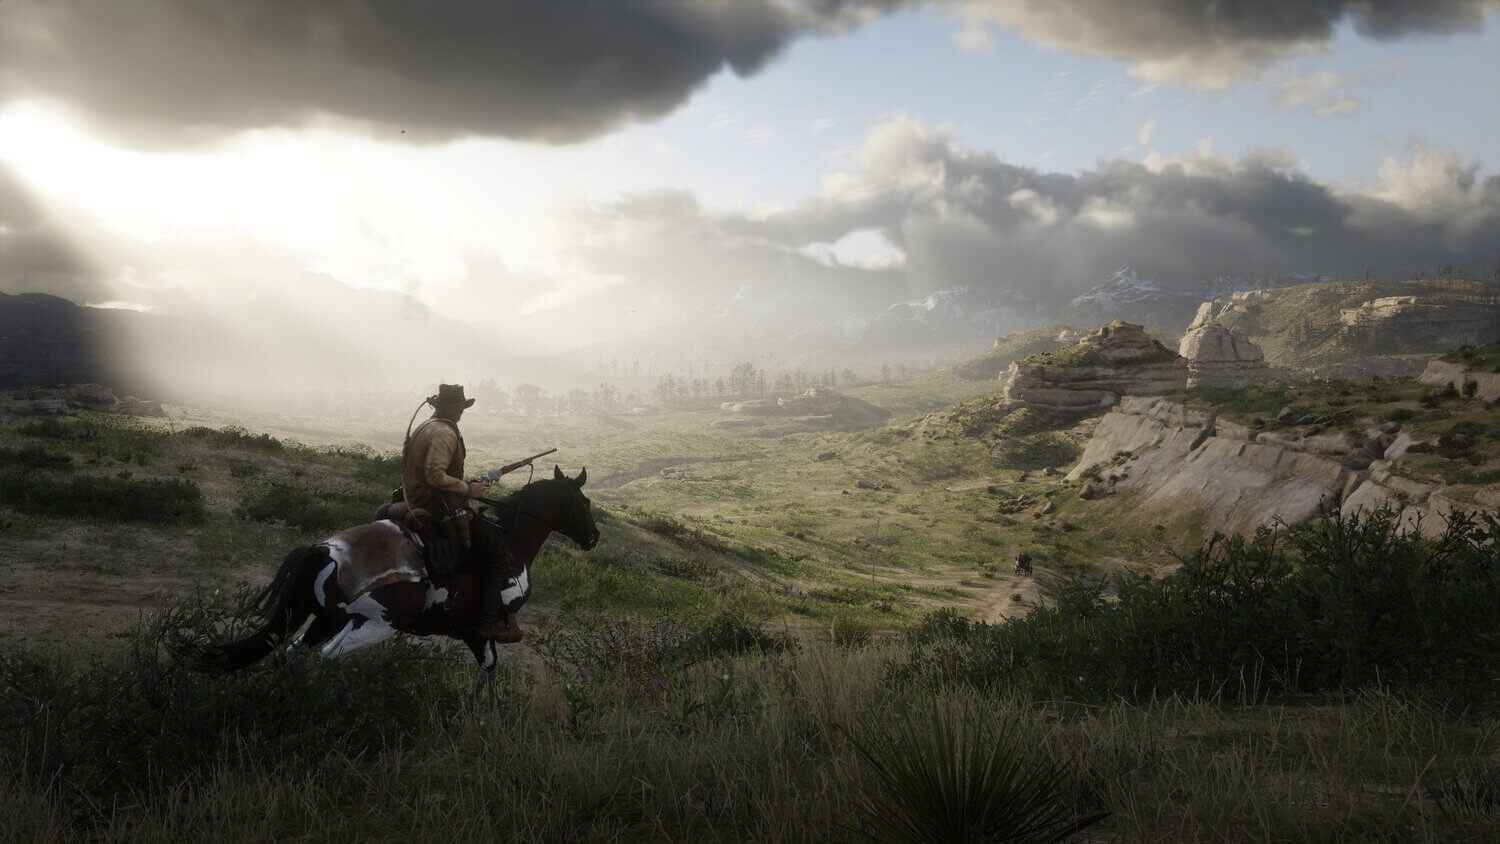 Now that RDR 2 has officially arrived on PC, many are asking if the game ha...